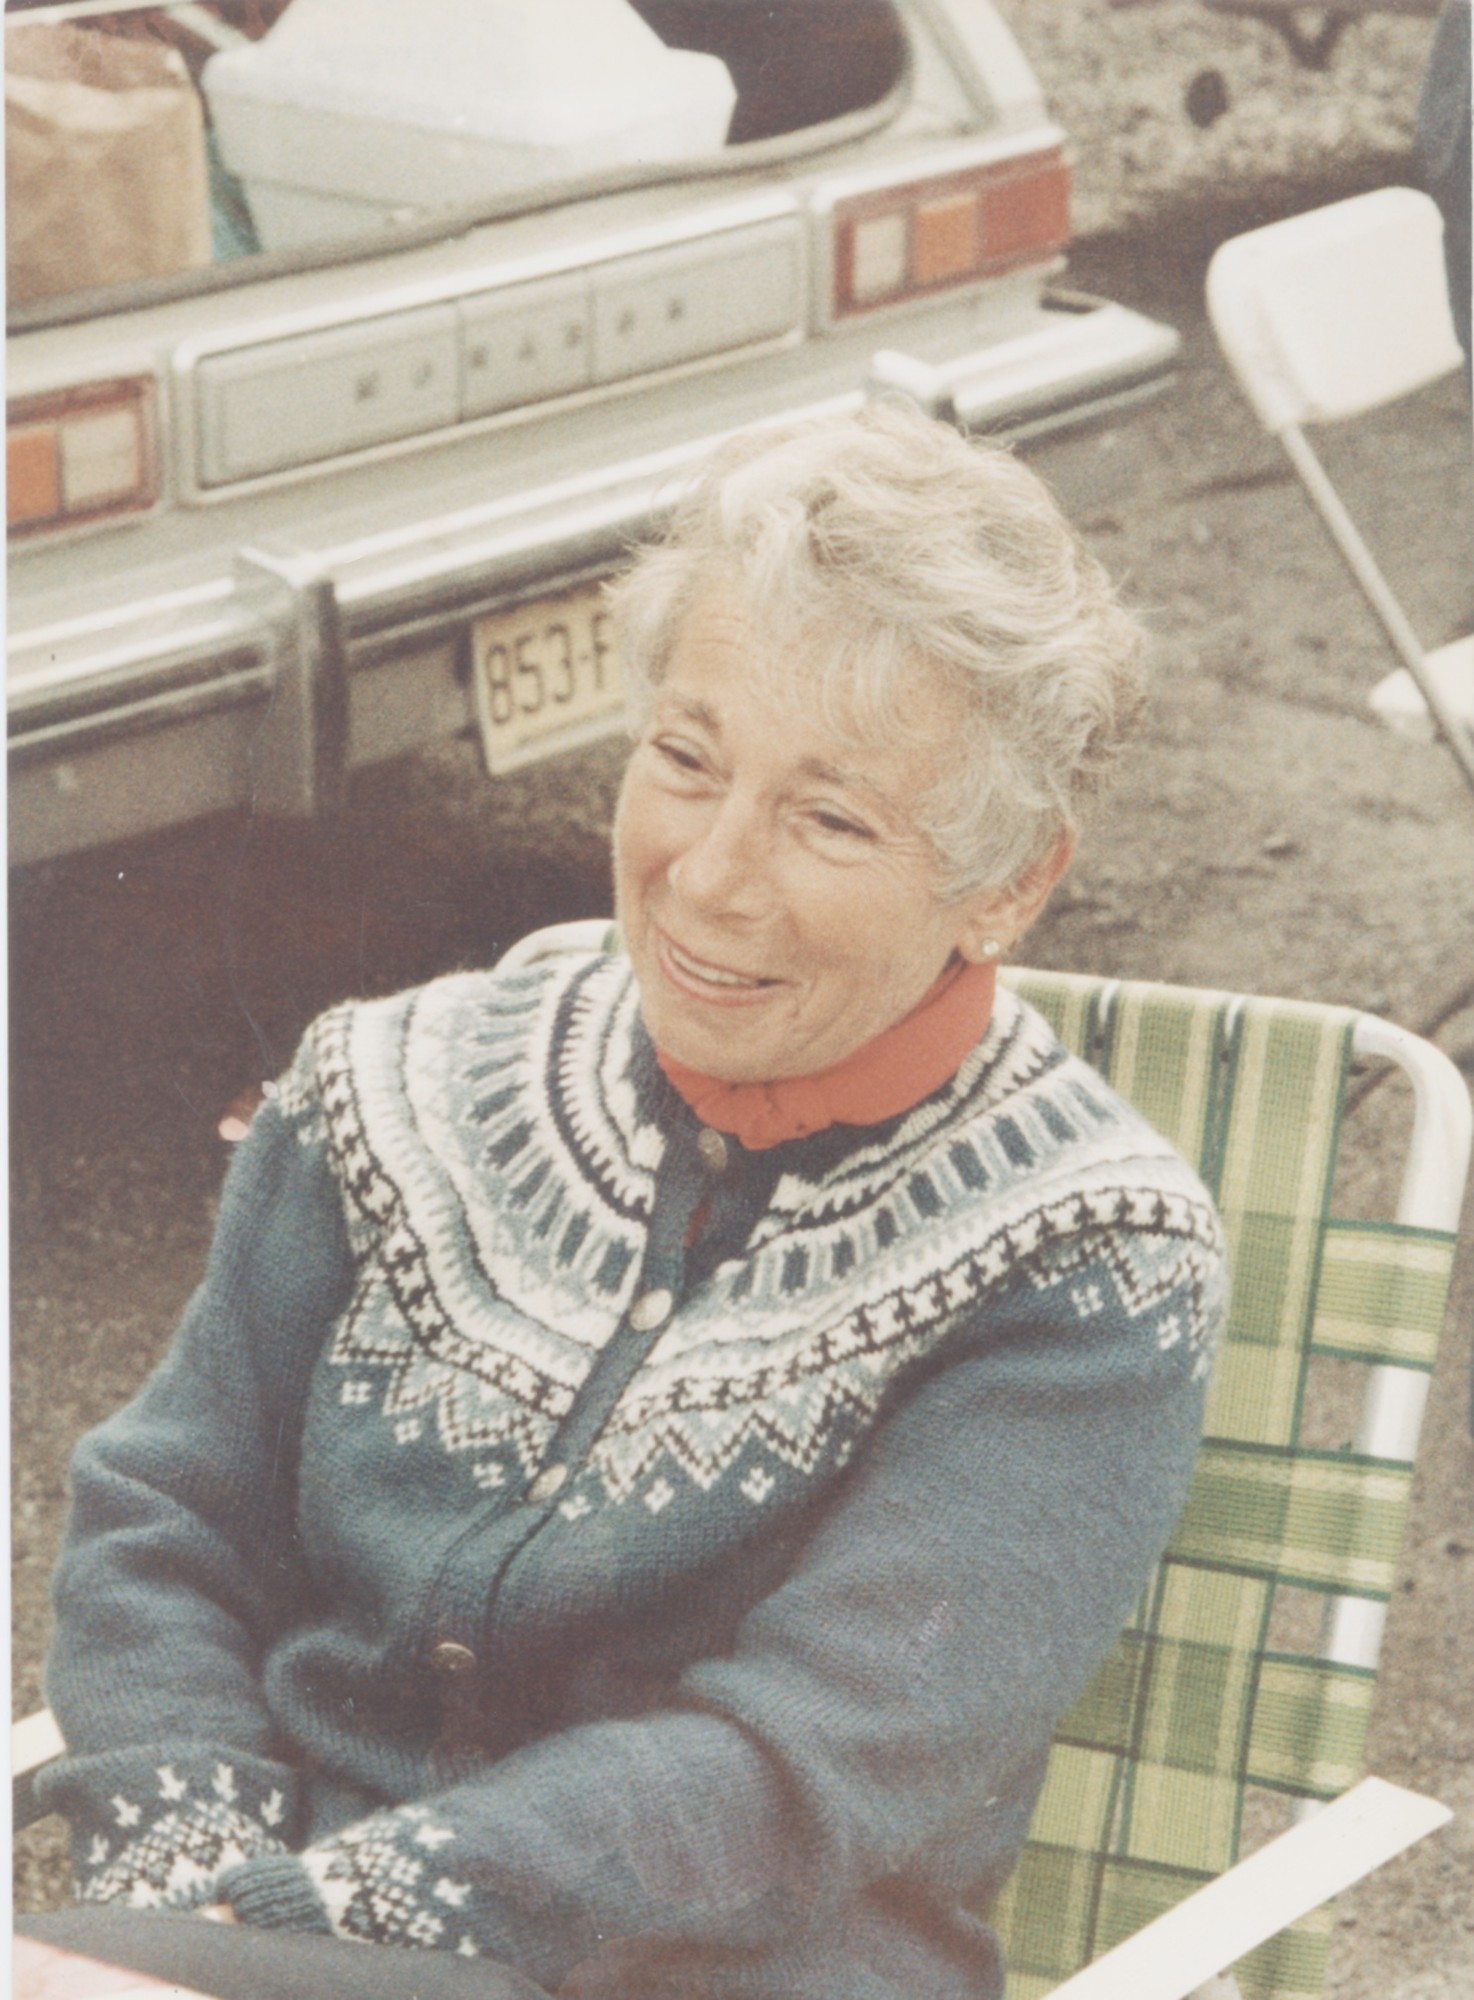 Relaxing in 1961, a then 50-year-old Henrietta Dobin had no idea her future would include playing bridge at 102.